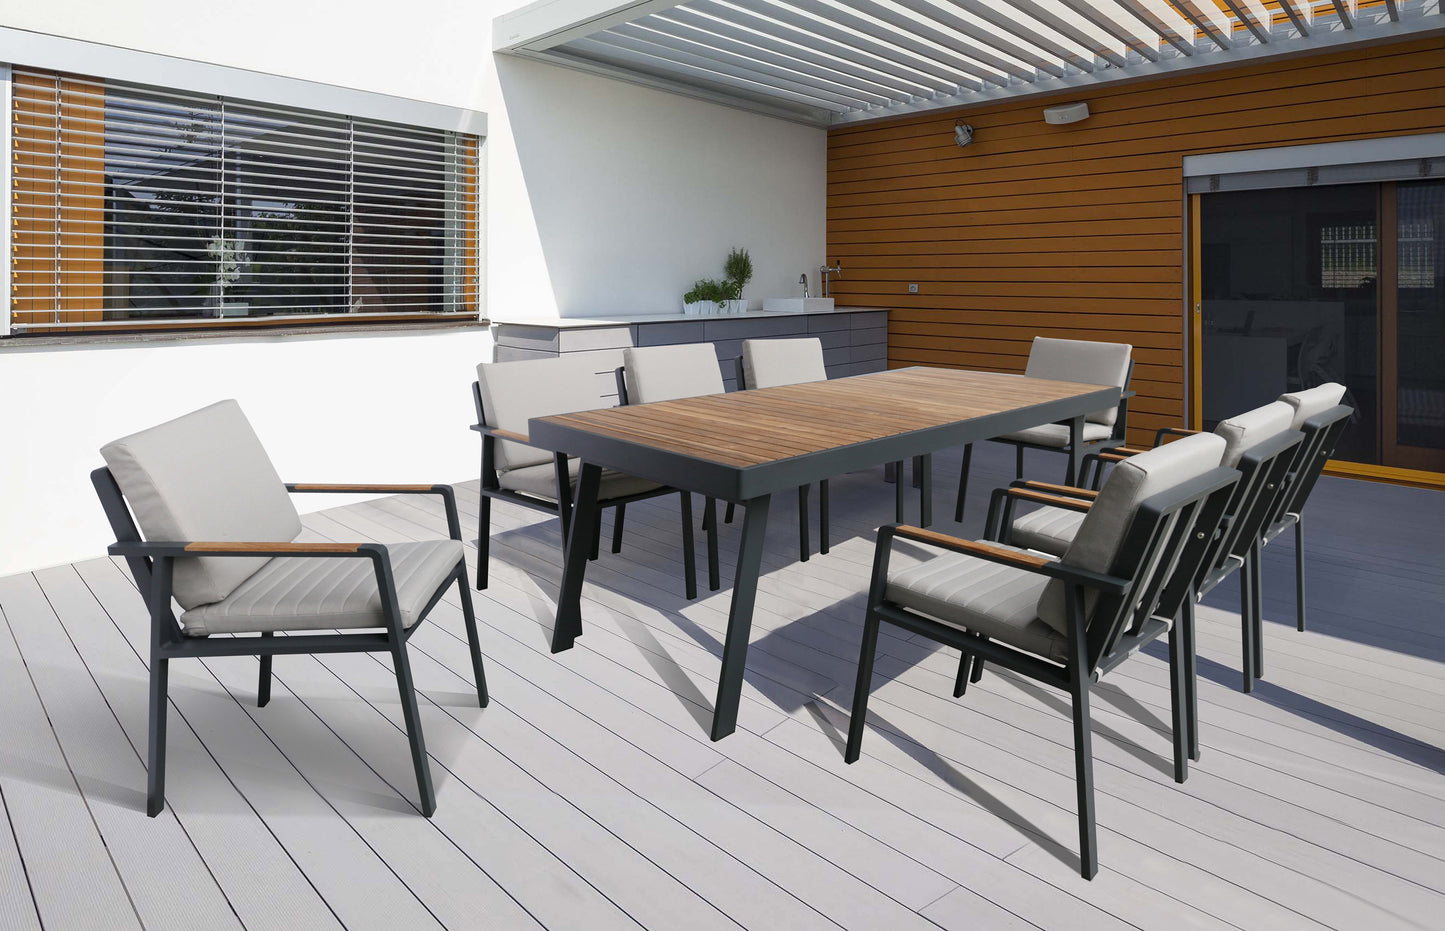 Nofi Outdoor Patio Dining Table in Charcoal Finish with Teak Wood Top